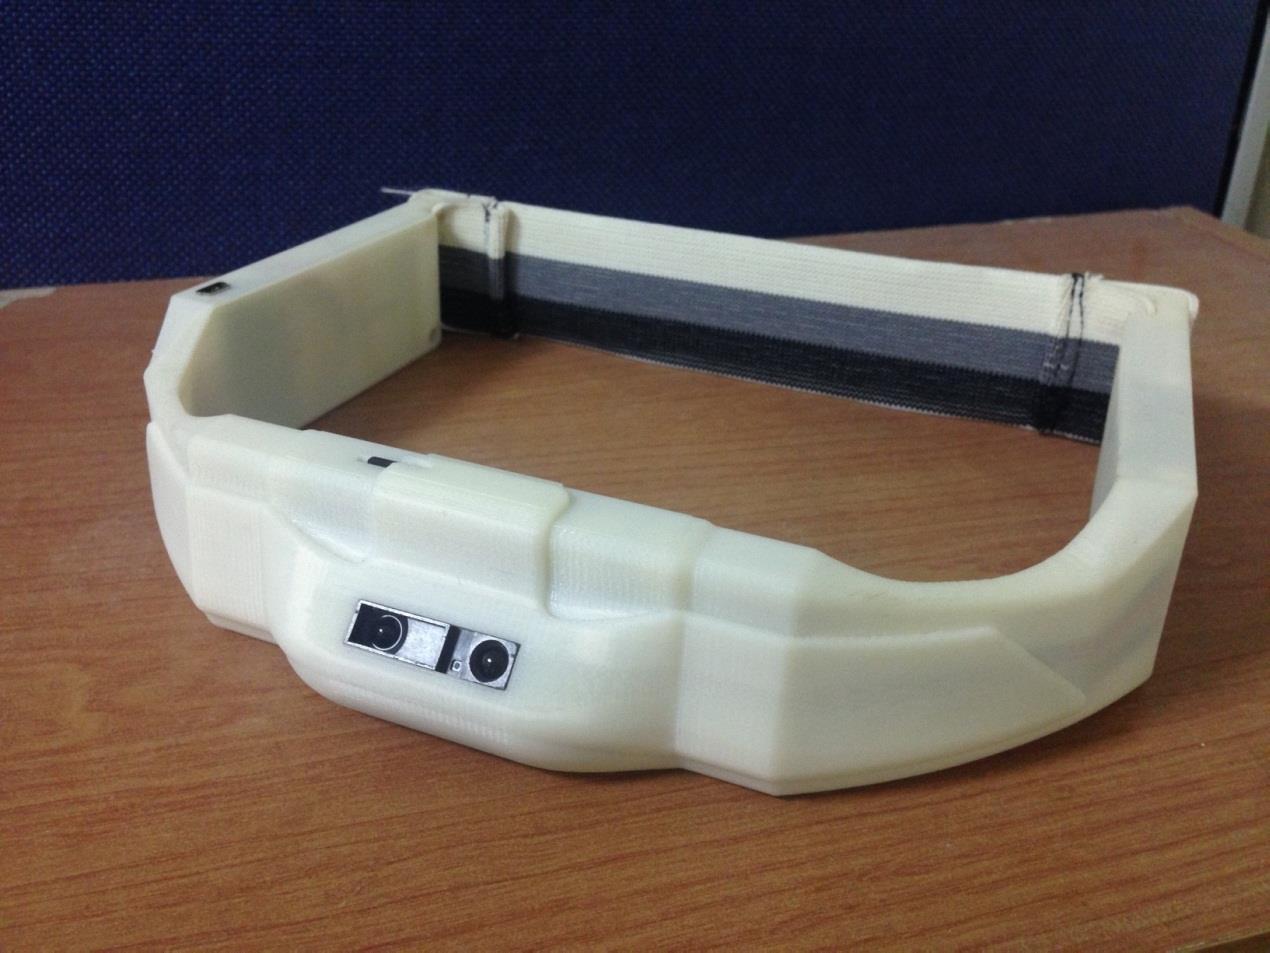 The Wearable Reading Monitoring Apparatus